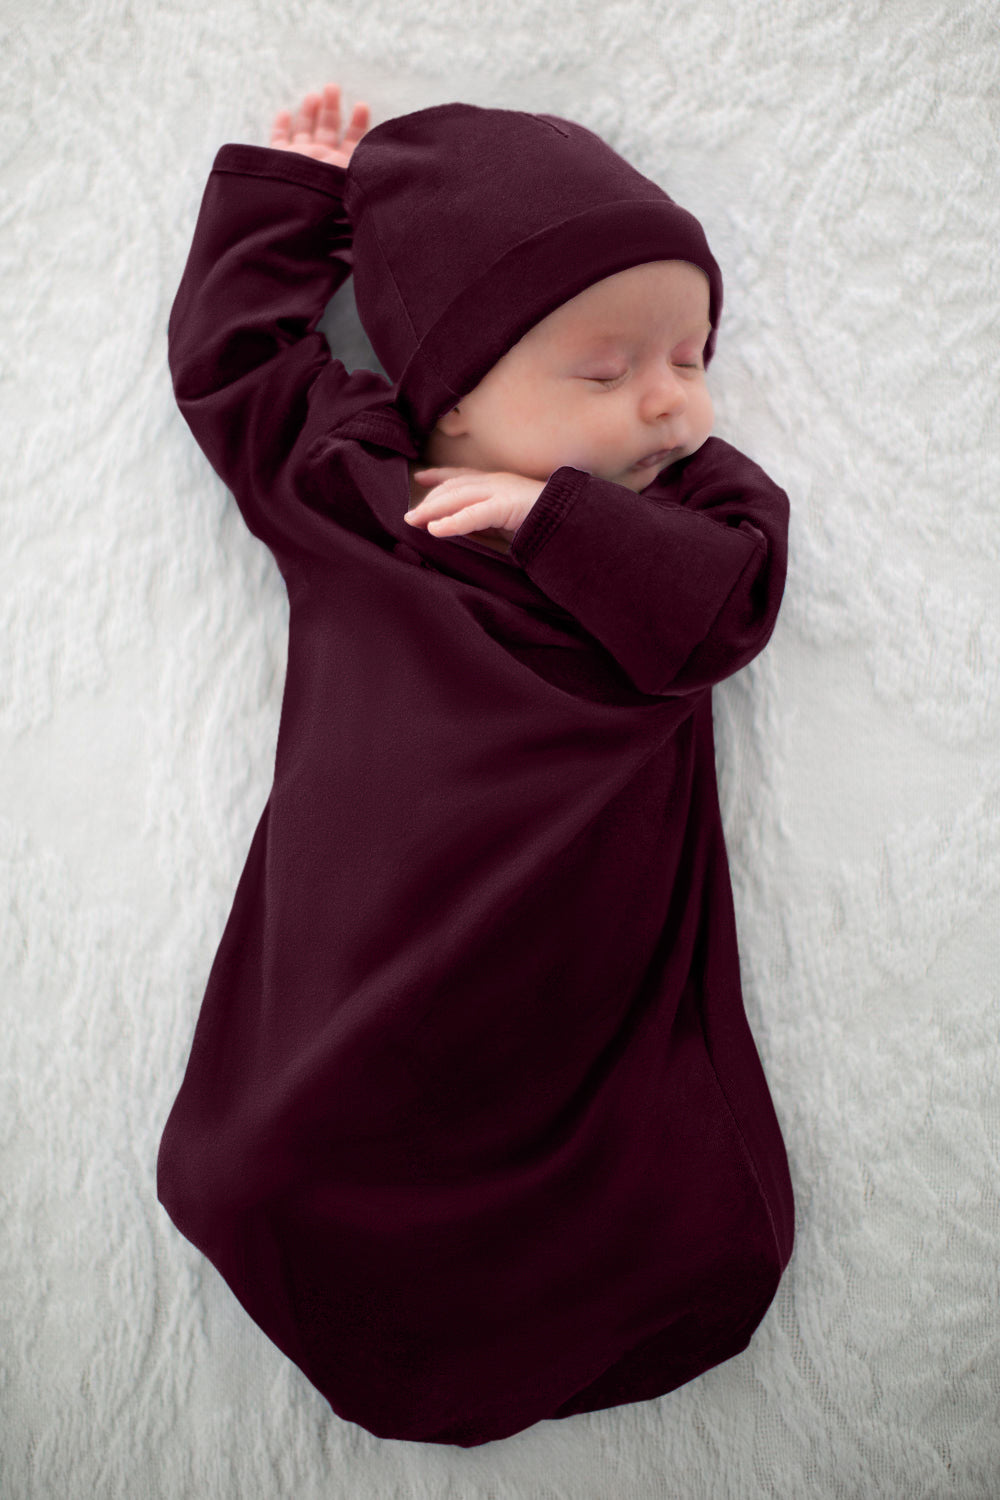 Merlot Baby Coming Home Outfit & Matching Newborn Hat Set